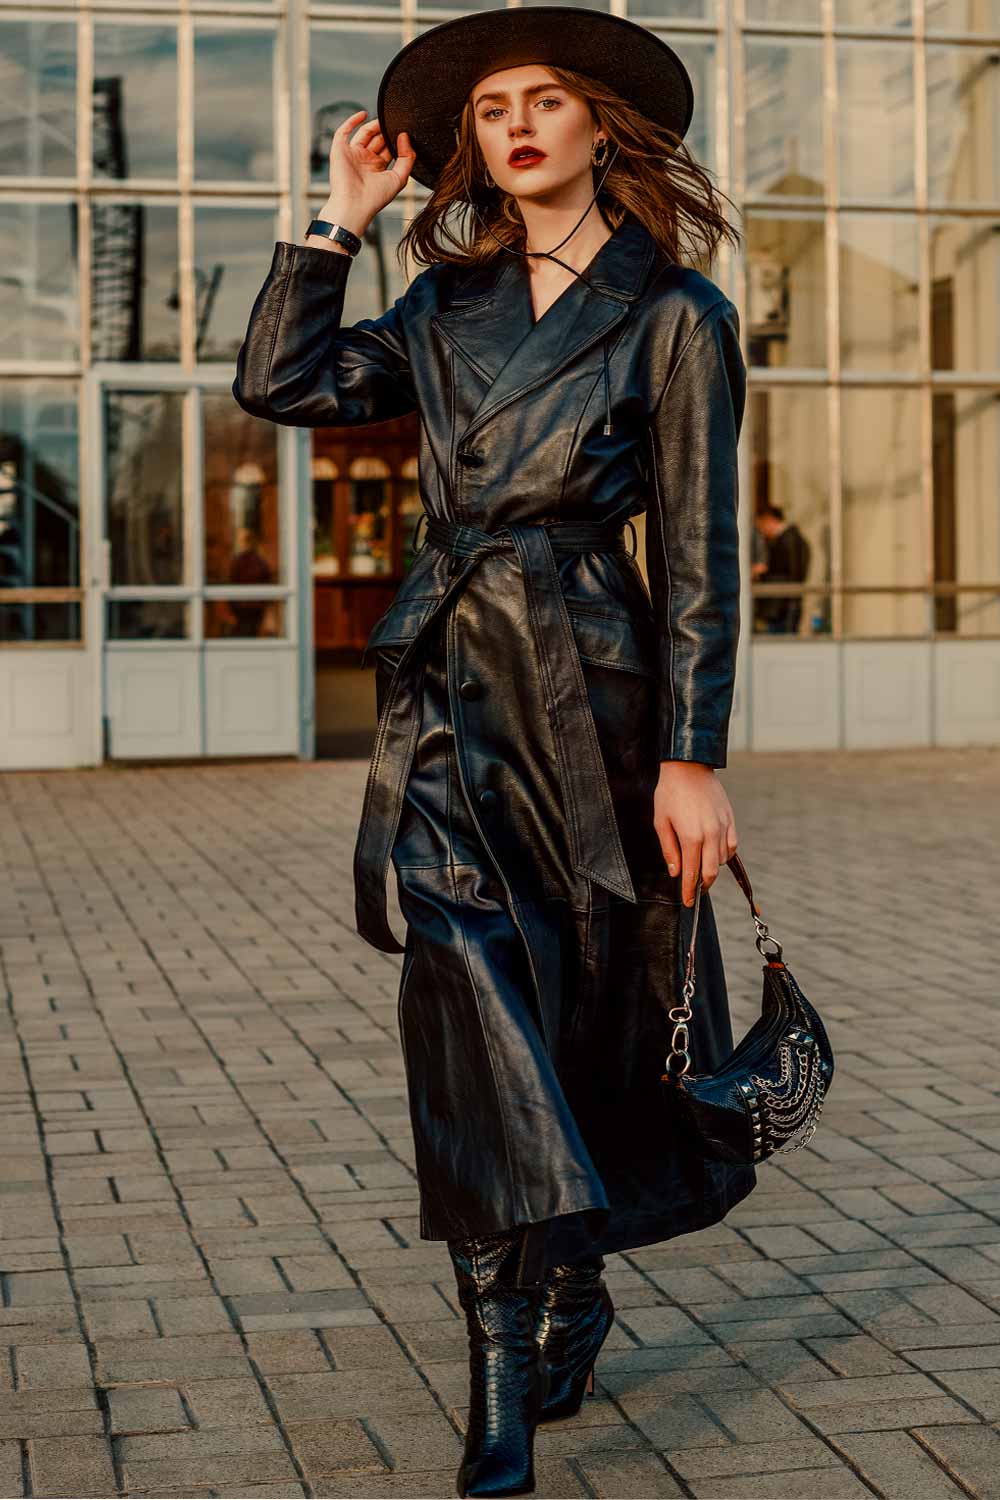 Classic Black Trench Coat For Monochromatic Look